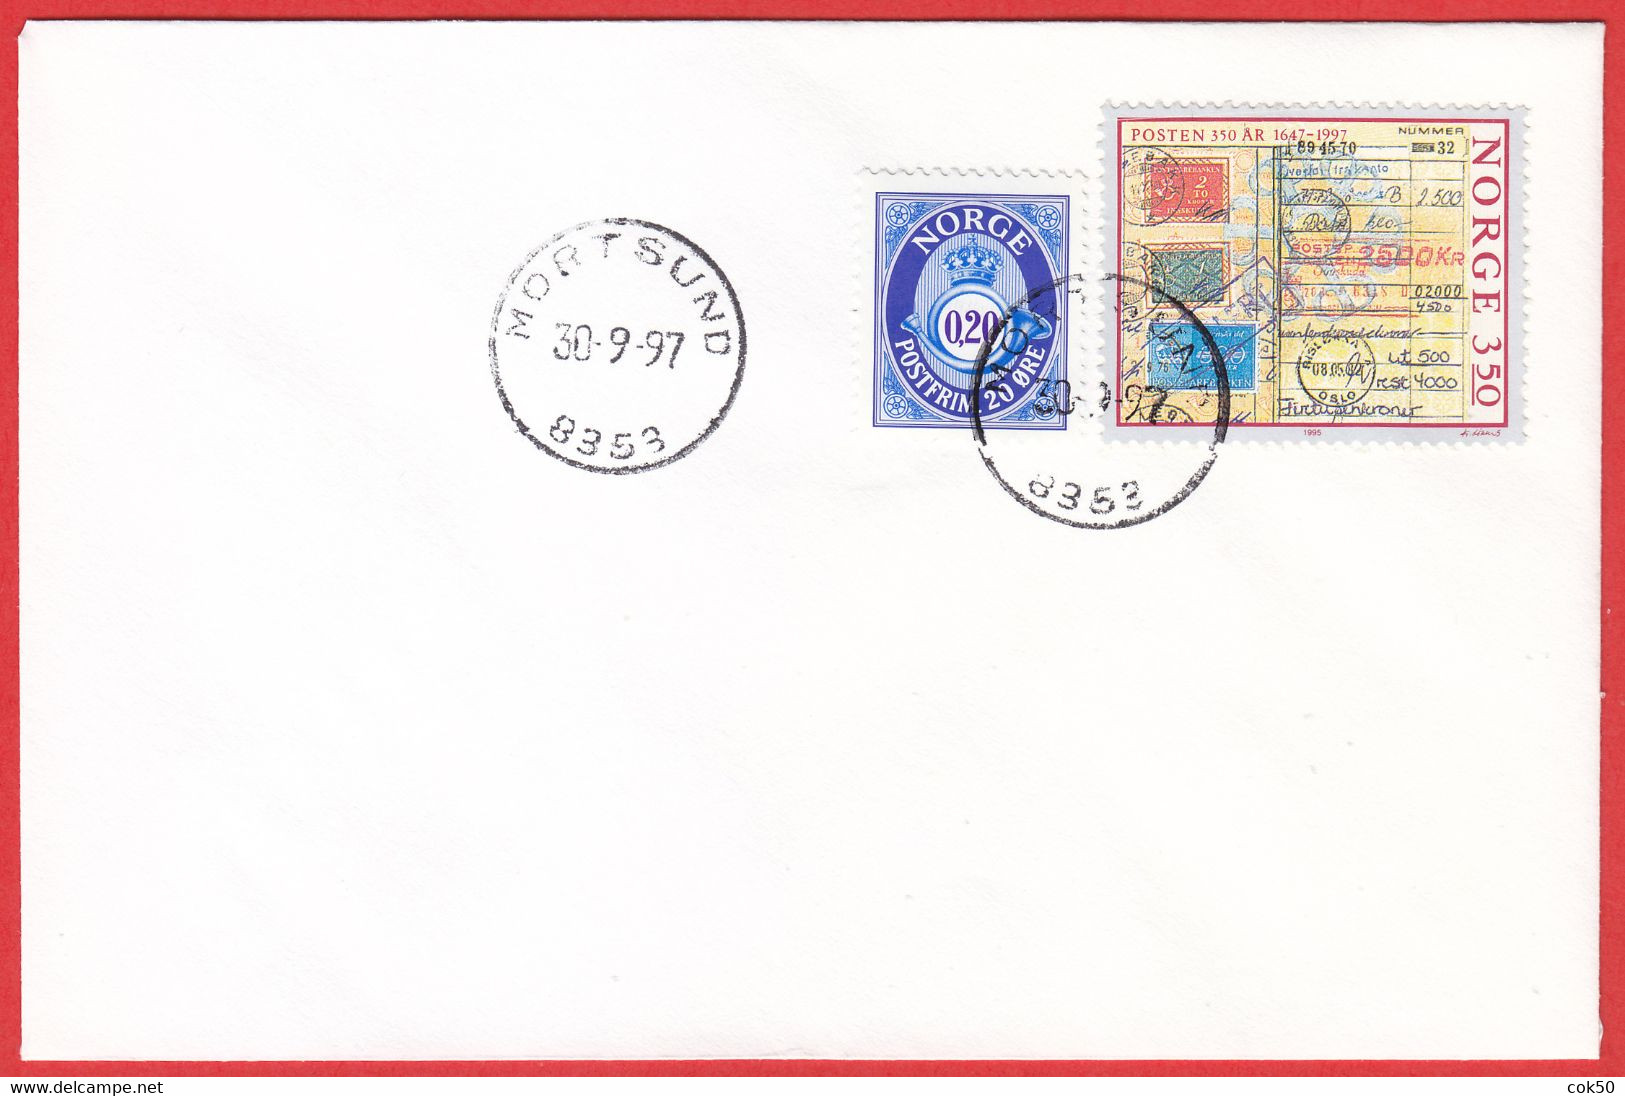 NORWAY -  8353 MORTSUND - (Nordland County) - Last Day/postoffice Closed On 1997.09.30 - Lokale Uitgaven